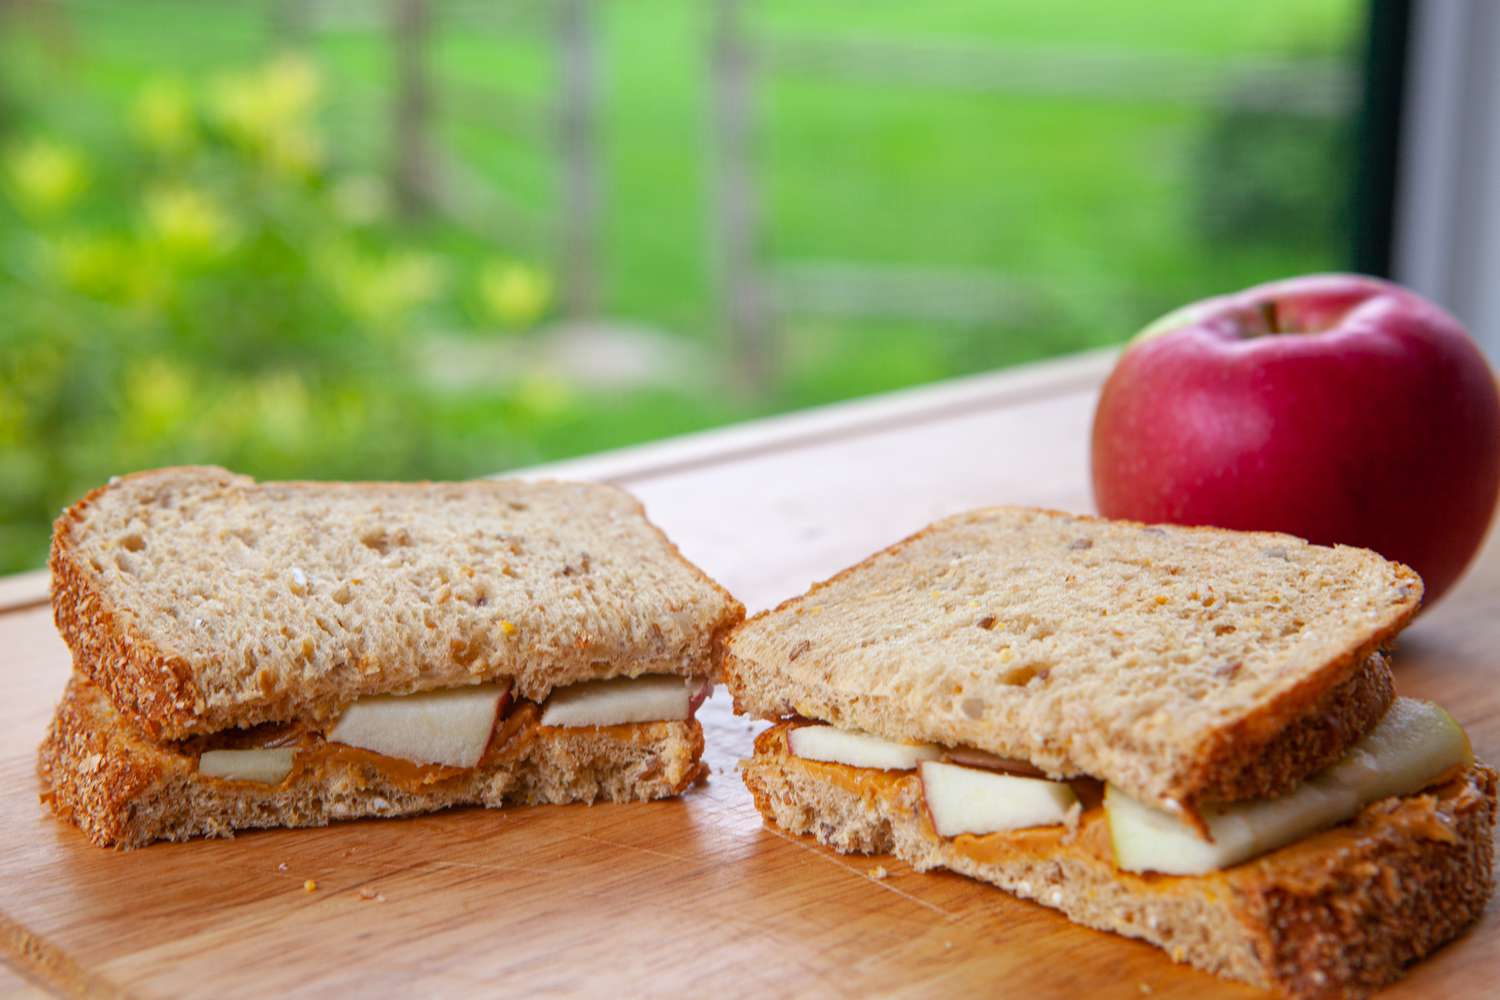 Apple and Almond Butter Sandwiches